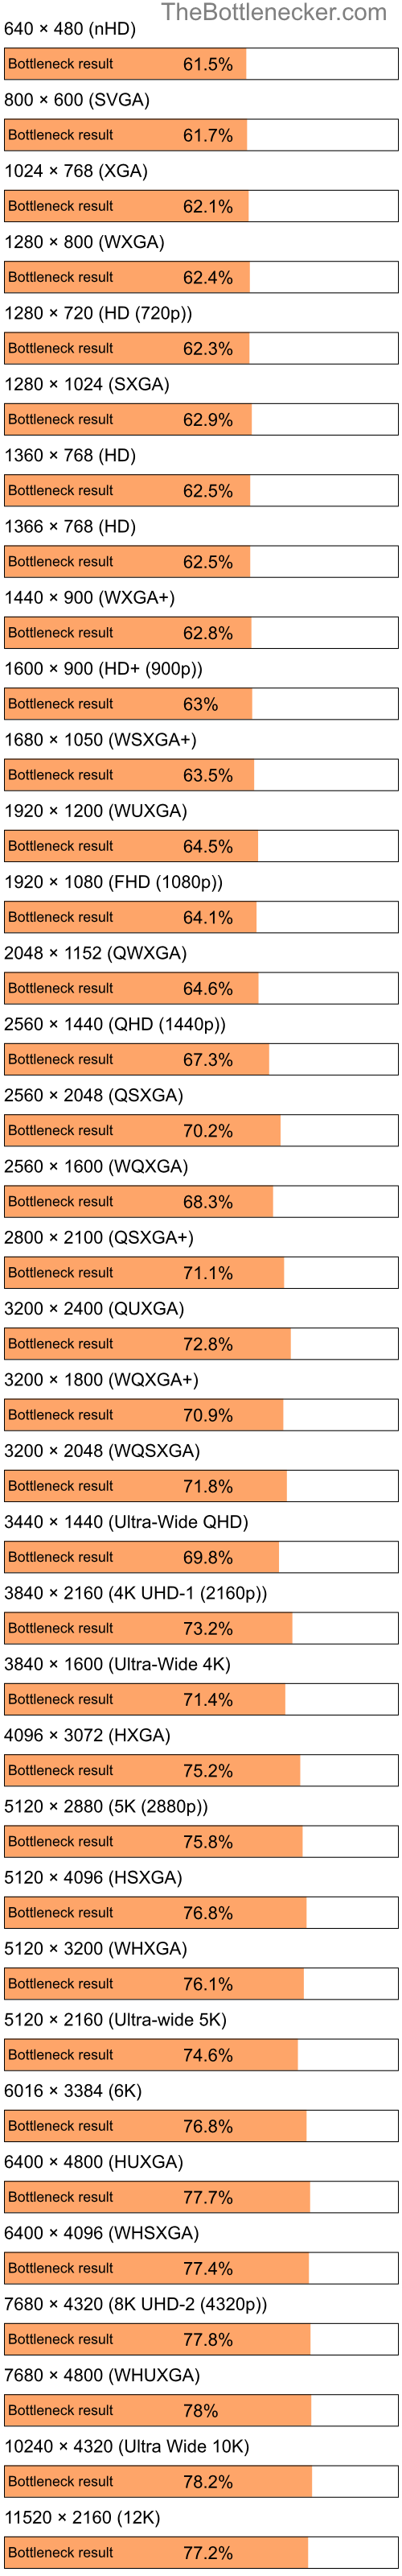 Bottleneck results by resolution for Intel Celeron and AMD Mobility Radeon HD 3430 in7 Days to Die